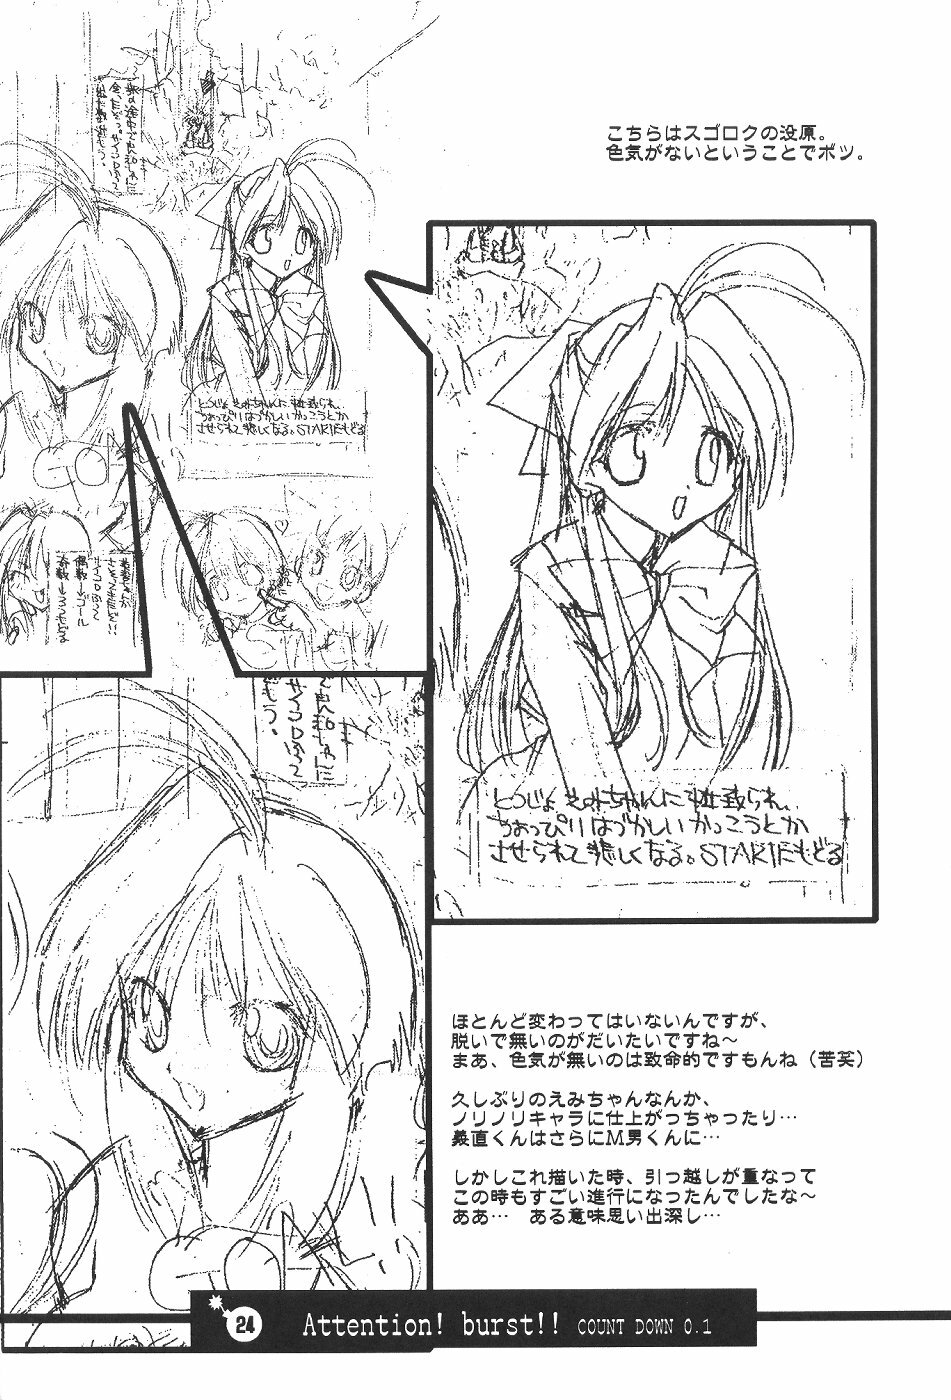 (C61) [Your's Wow (Konata Hyuura)] Bakusun Attention! Burst!! Count Down 0.1 page 25 full